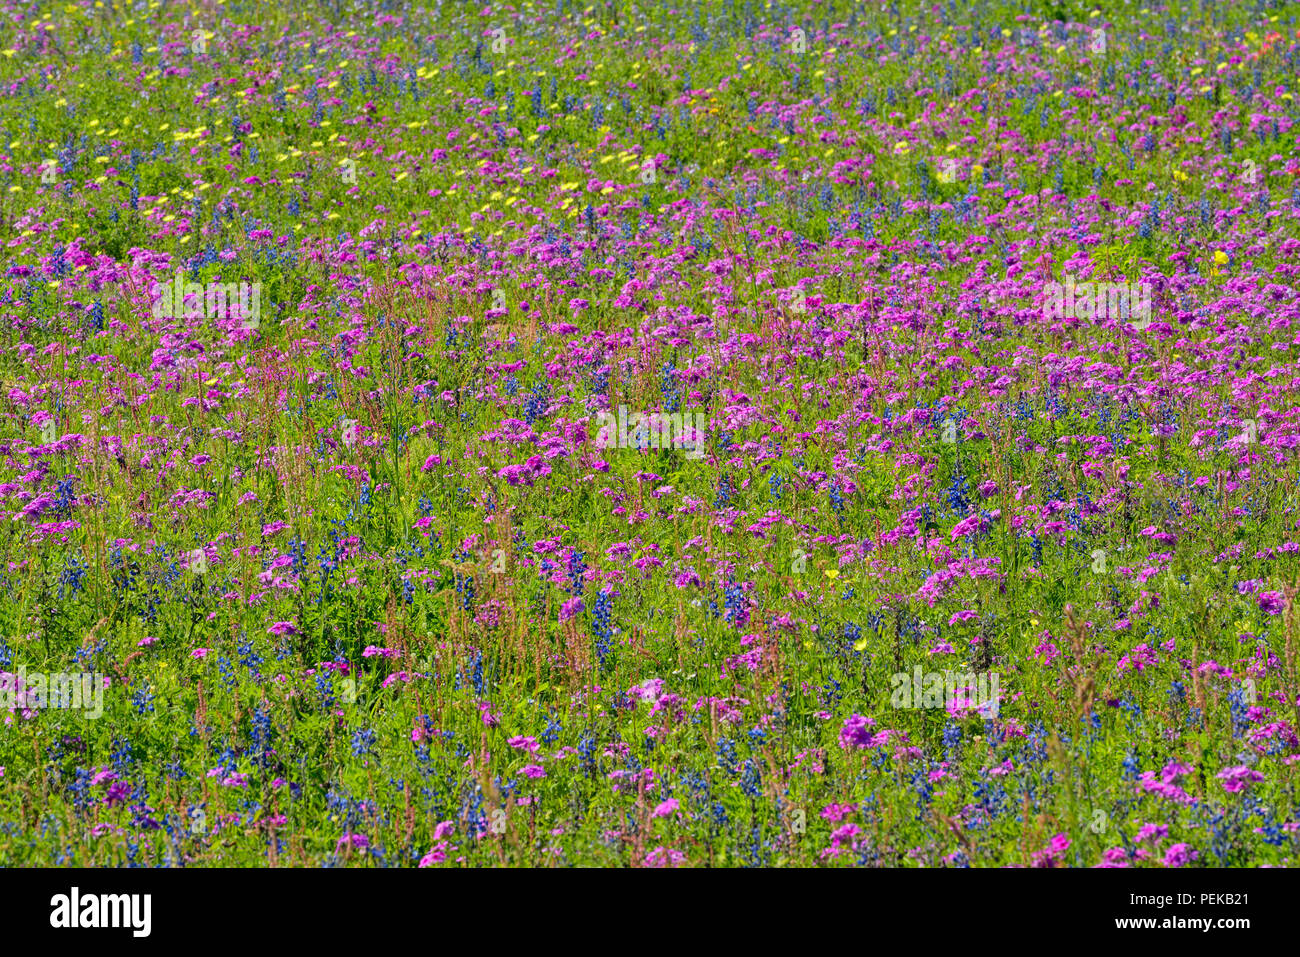 A field with wildflowers- phlox and Texas bluebonnet (Lupinus subcarnosus), FM 2504 near Somerset, Texas, USA Stock Photo